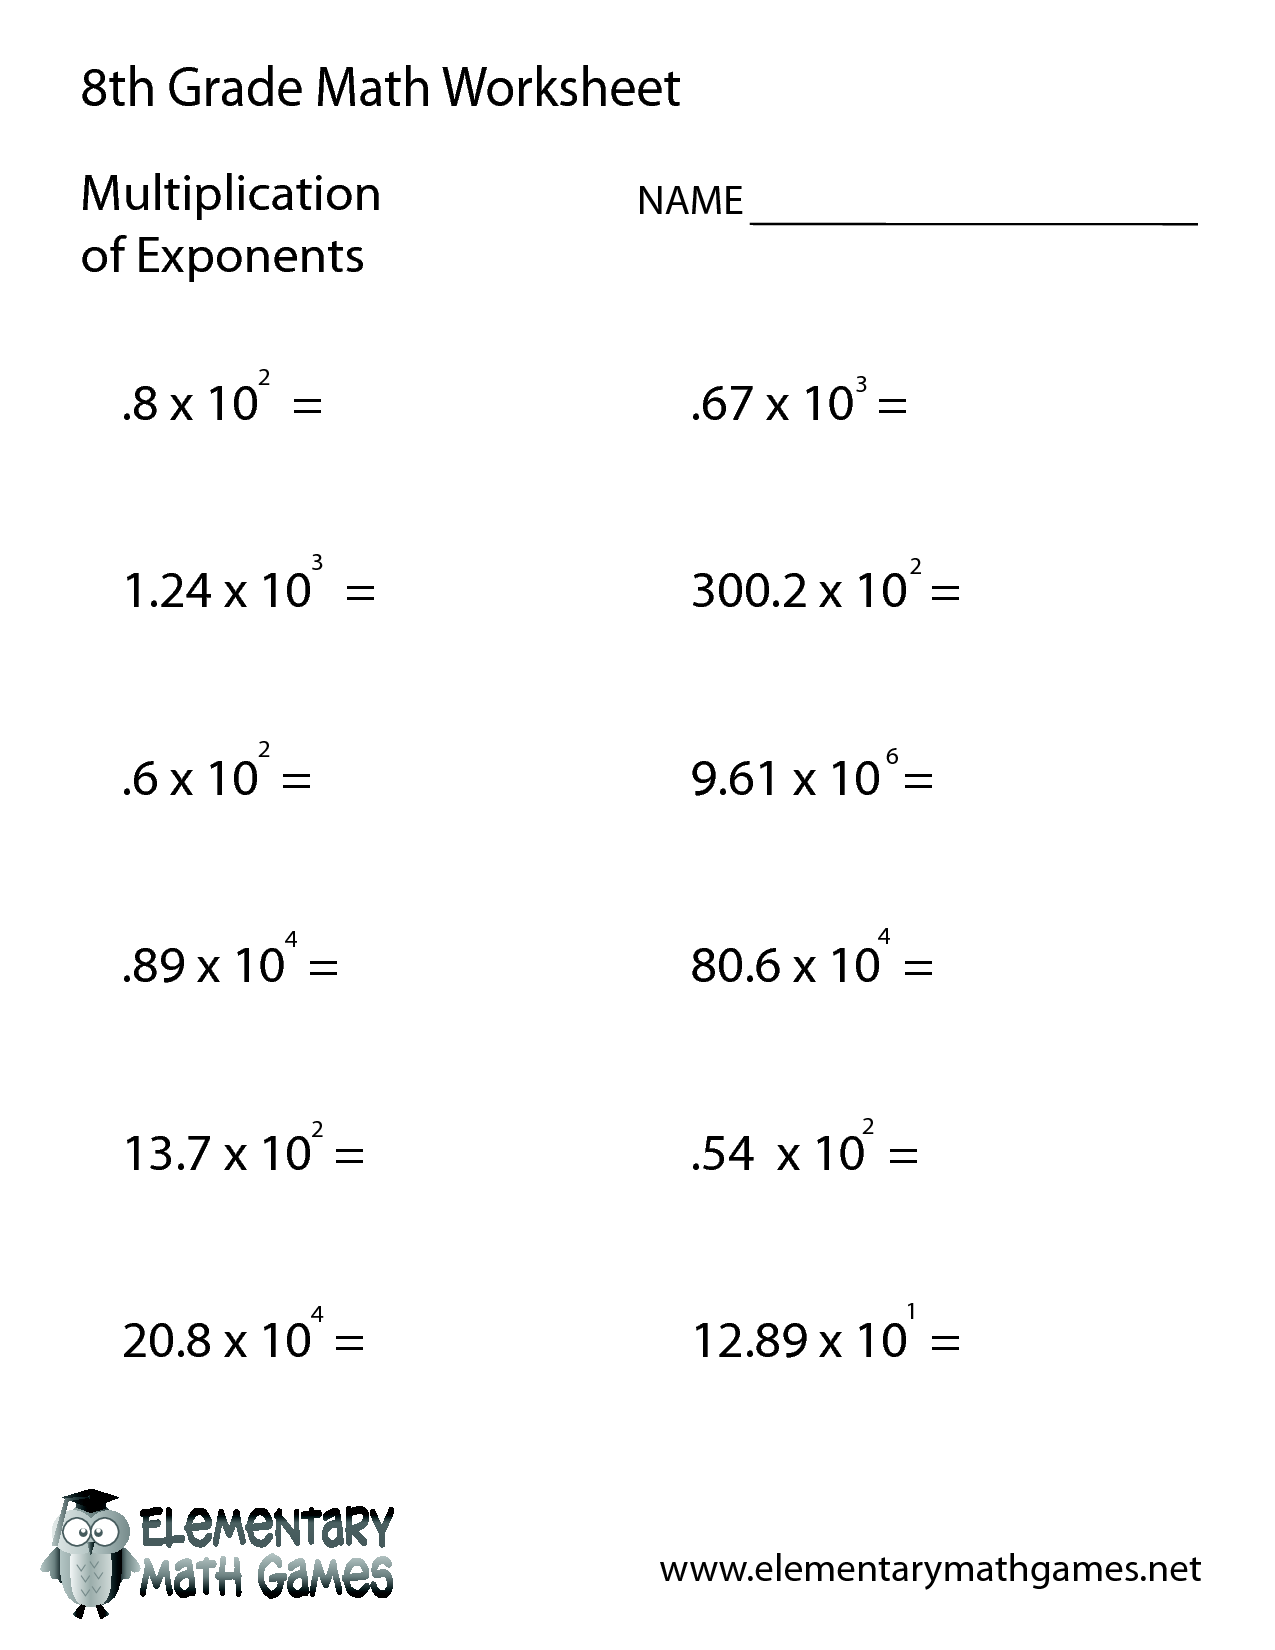 10 Images of 8th Grade Math Equations Worksheets